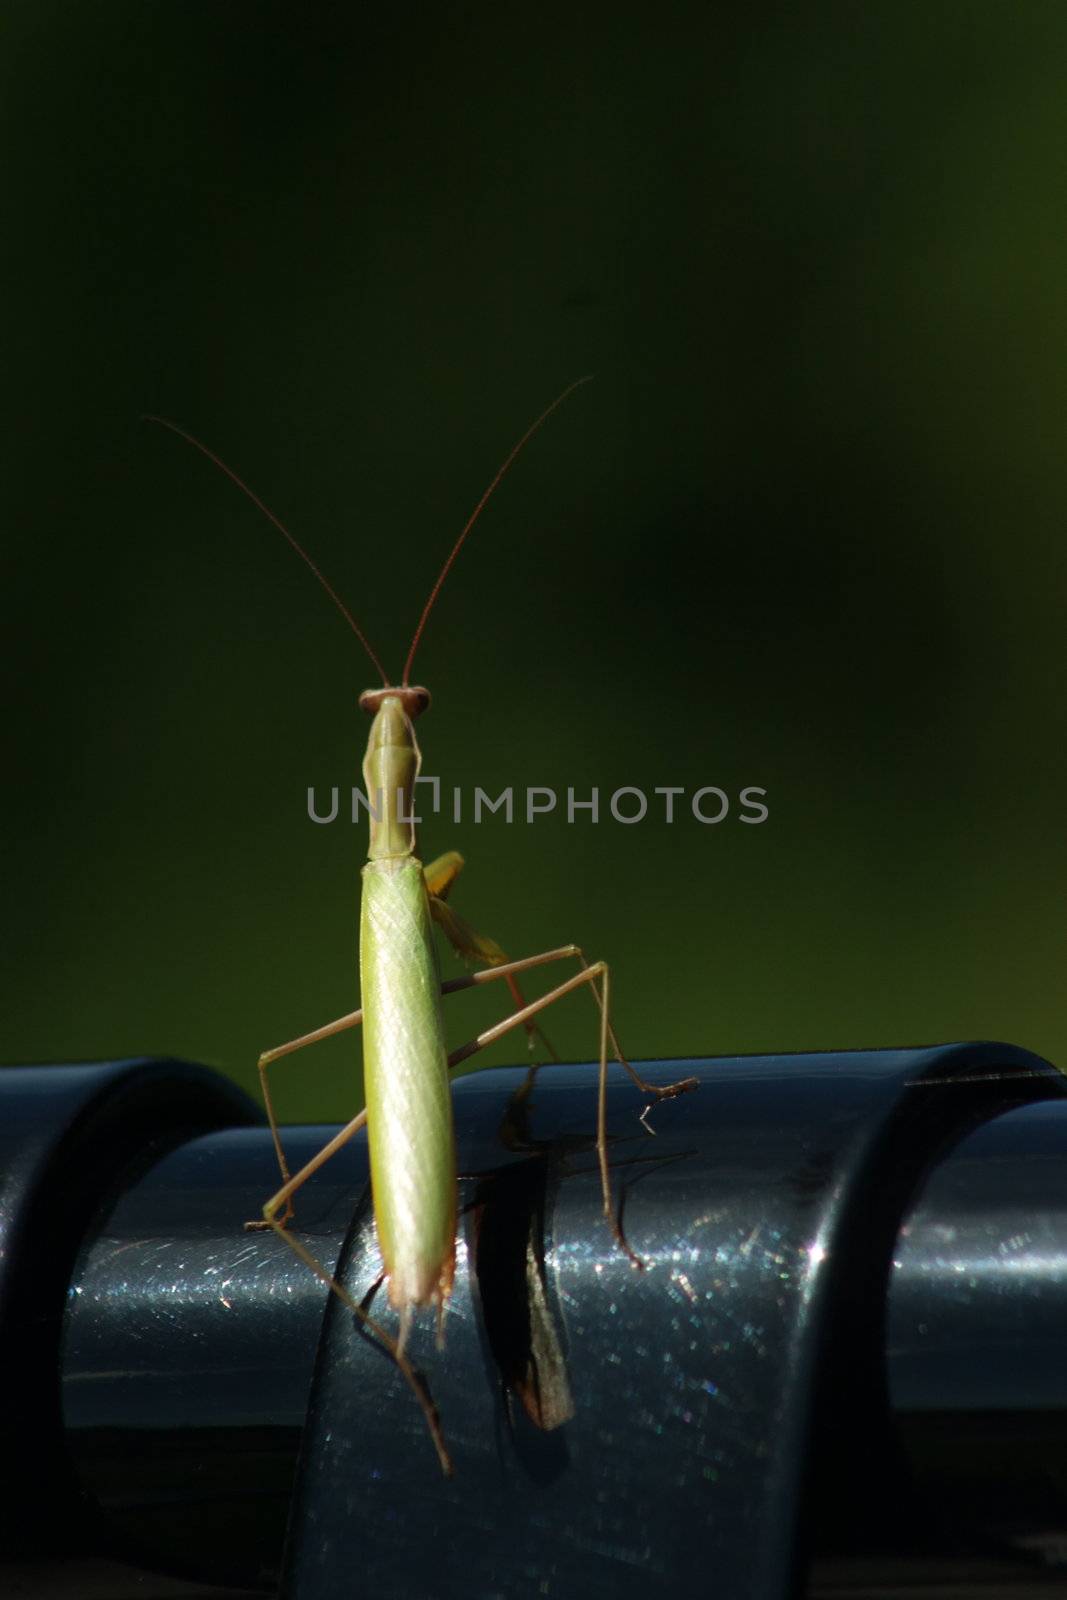 A grass hopper sitting on the edge of a black metal bench.